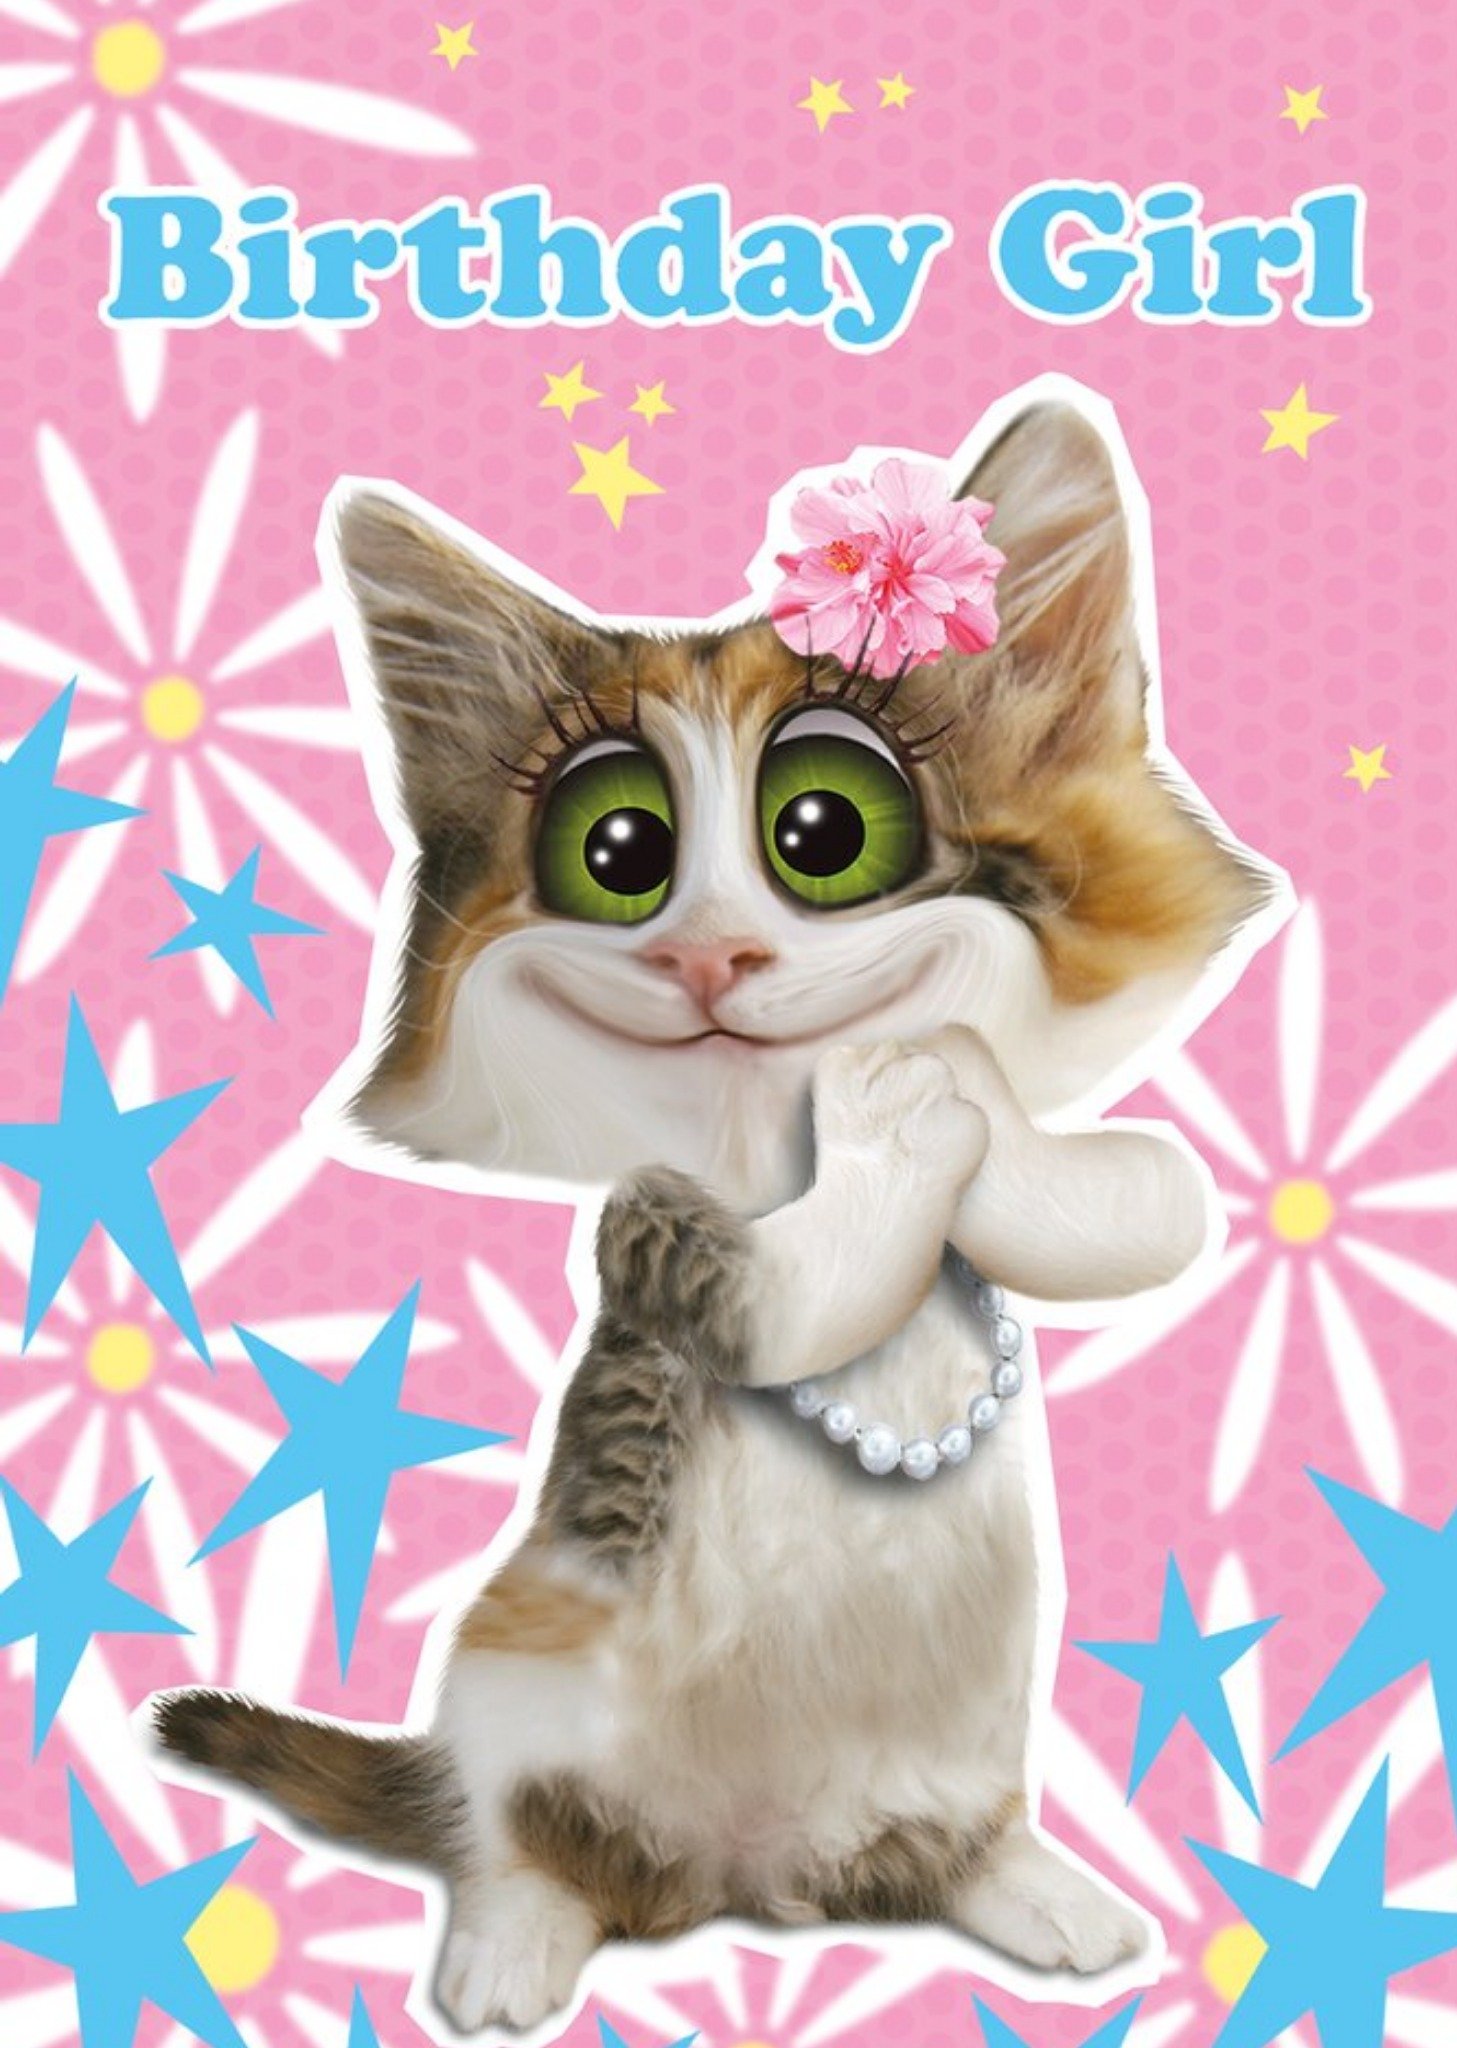 Moonpig Cartoon Illustration Of A Cute Cat Smiling Surrounded By Stars Birthday Girl Card, Large